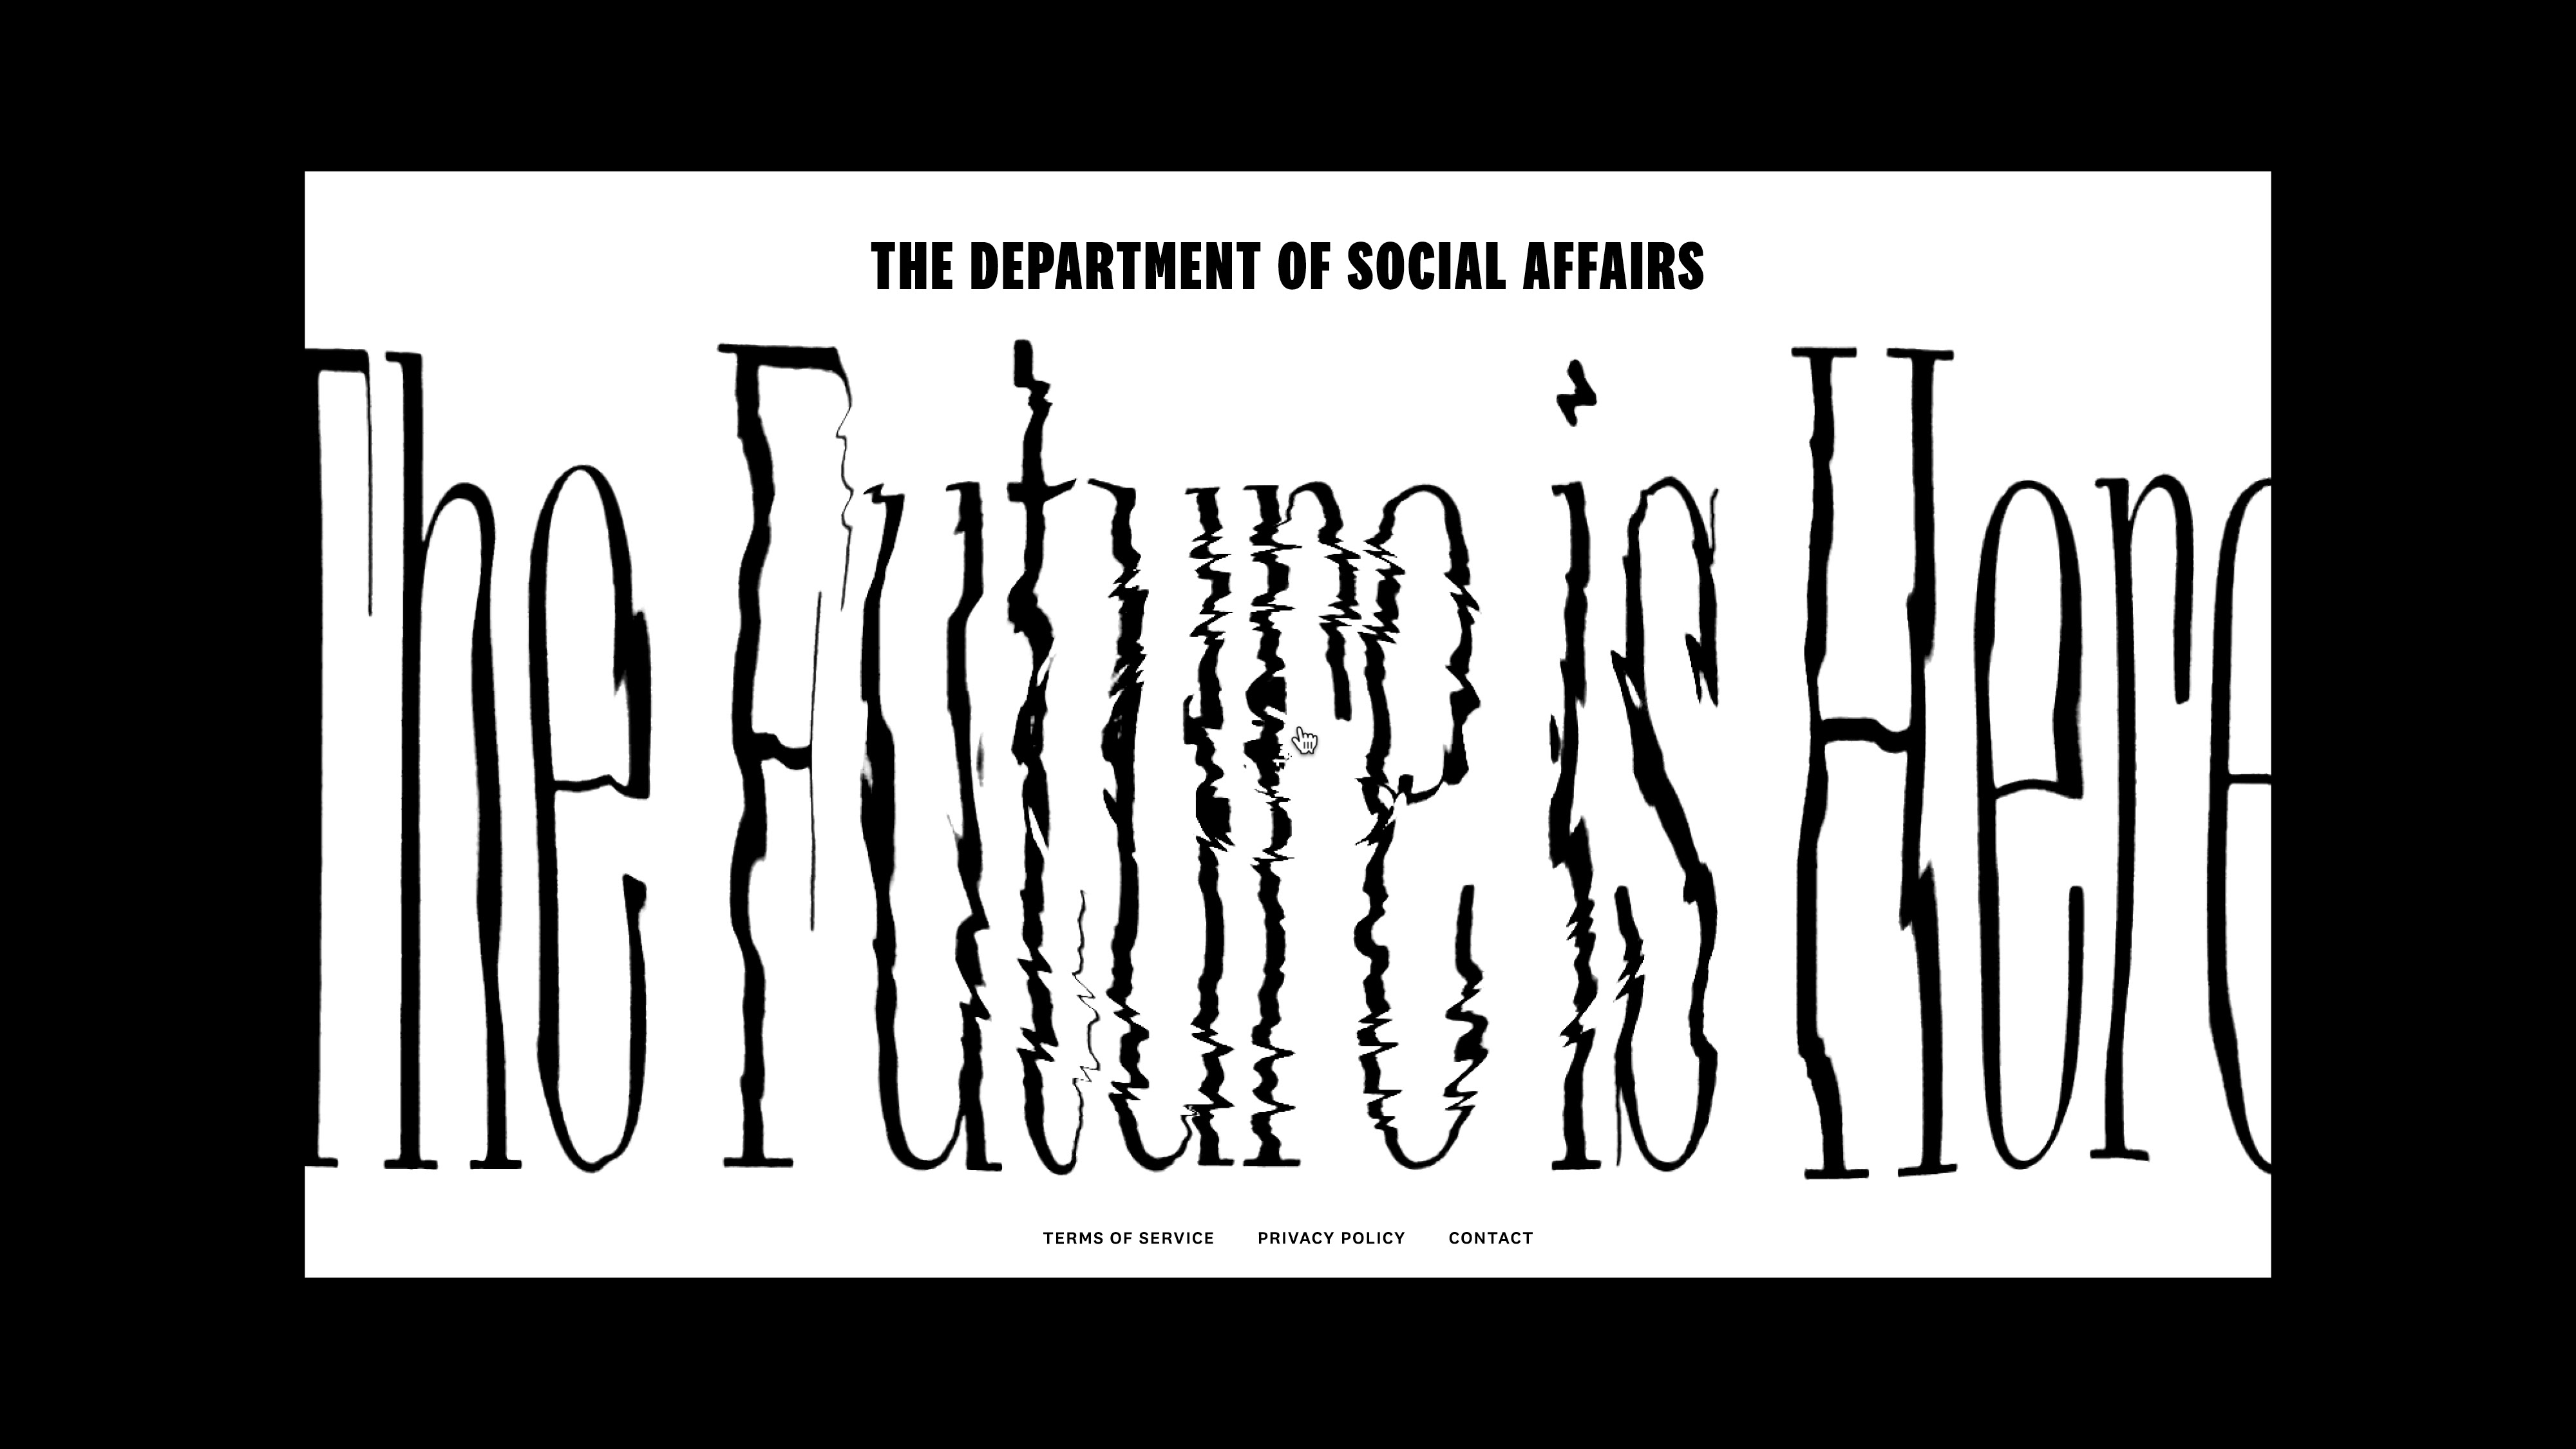 The Department of Social Affairs